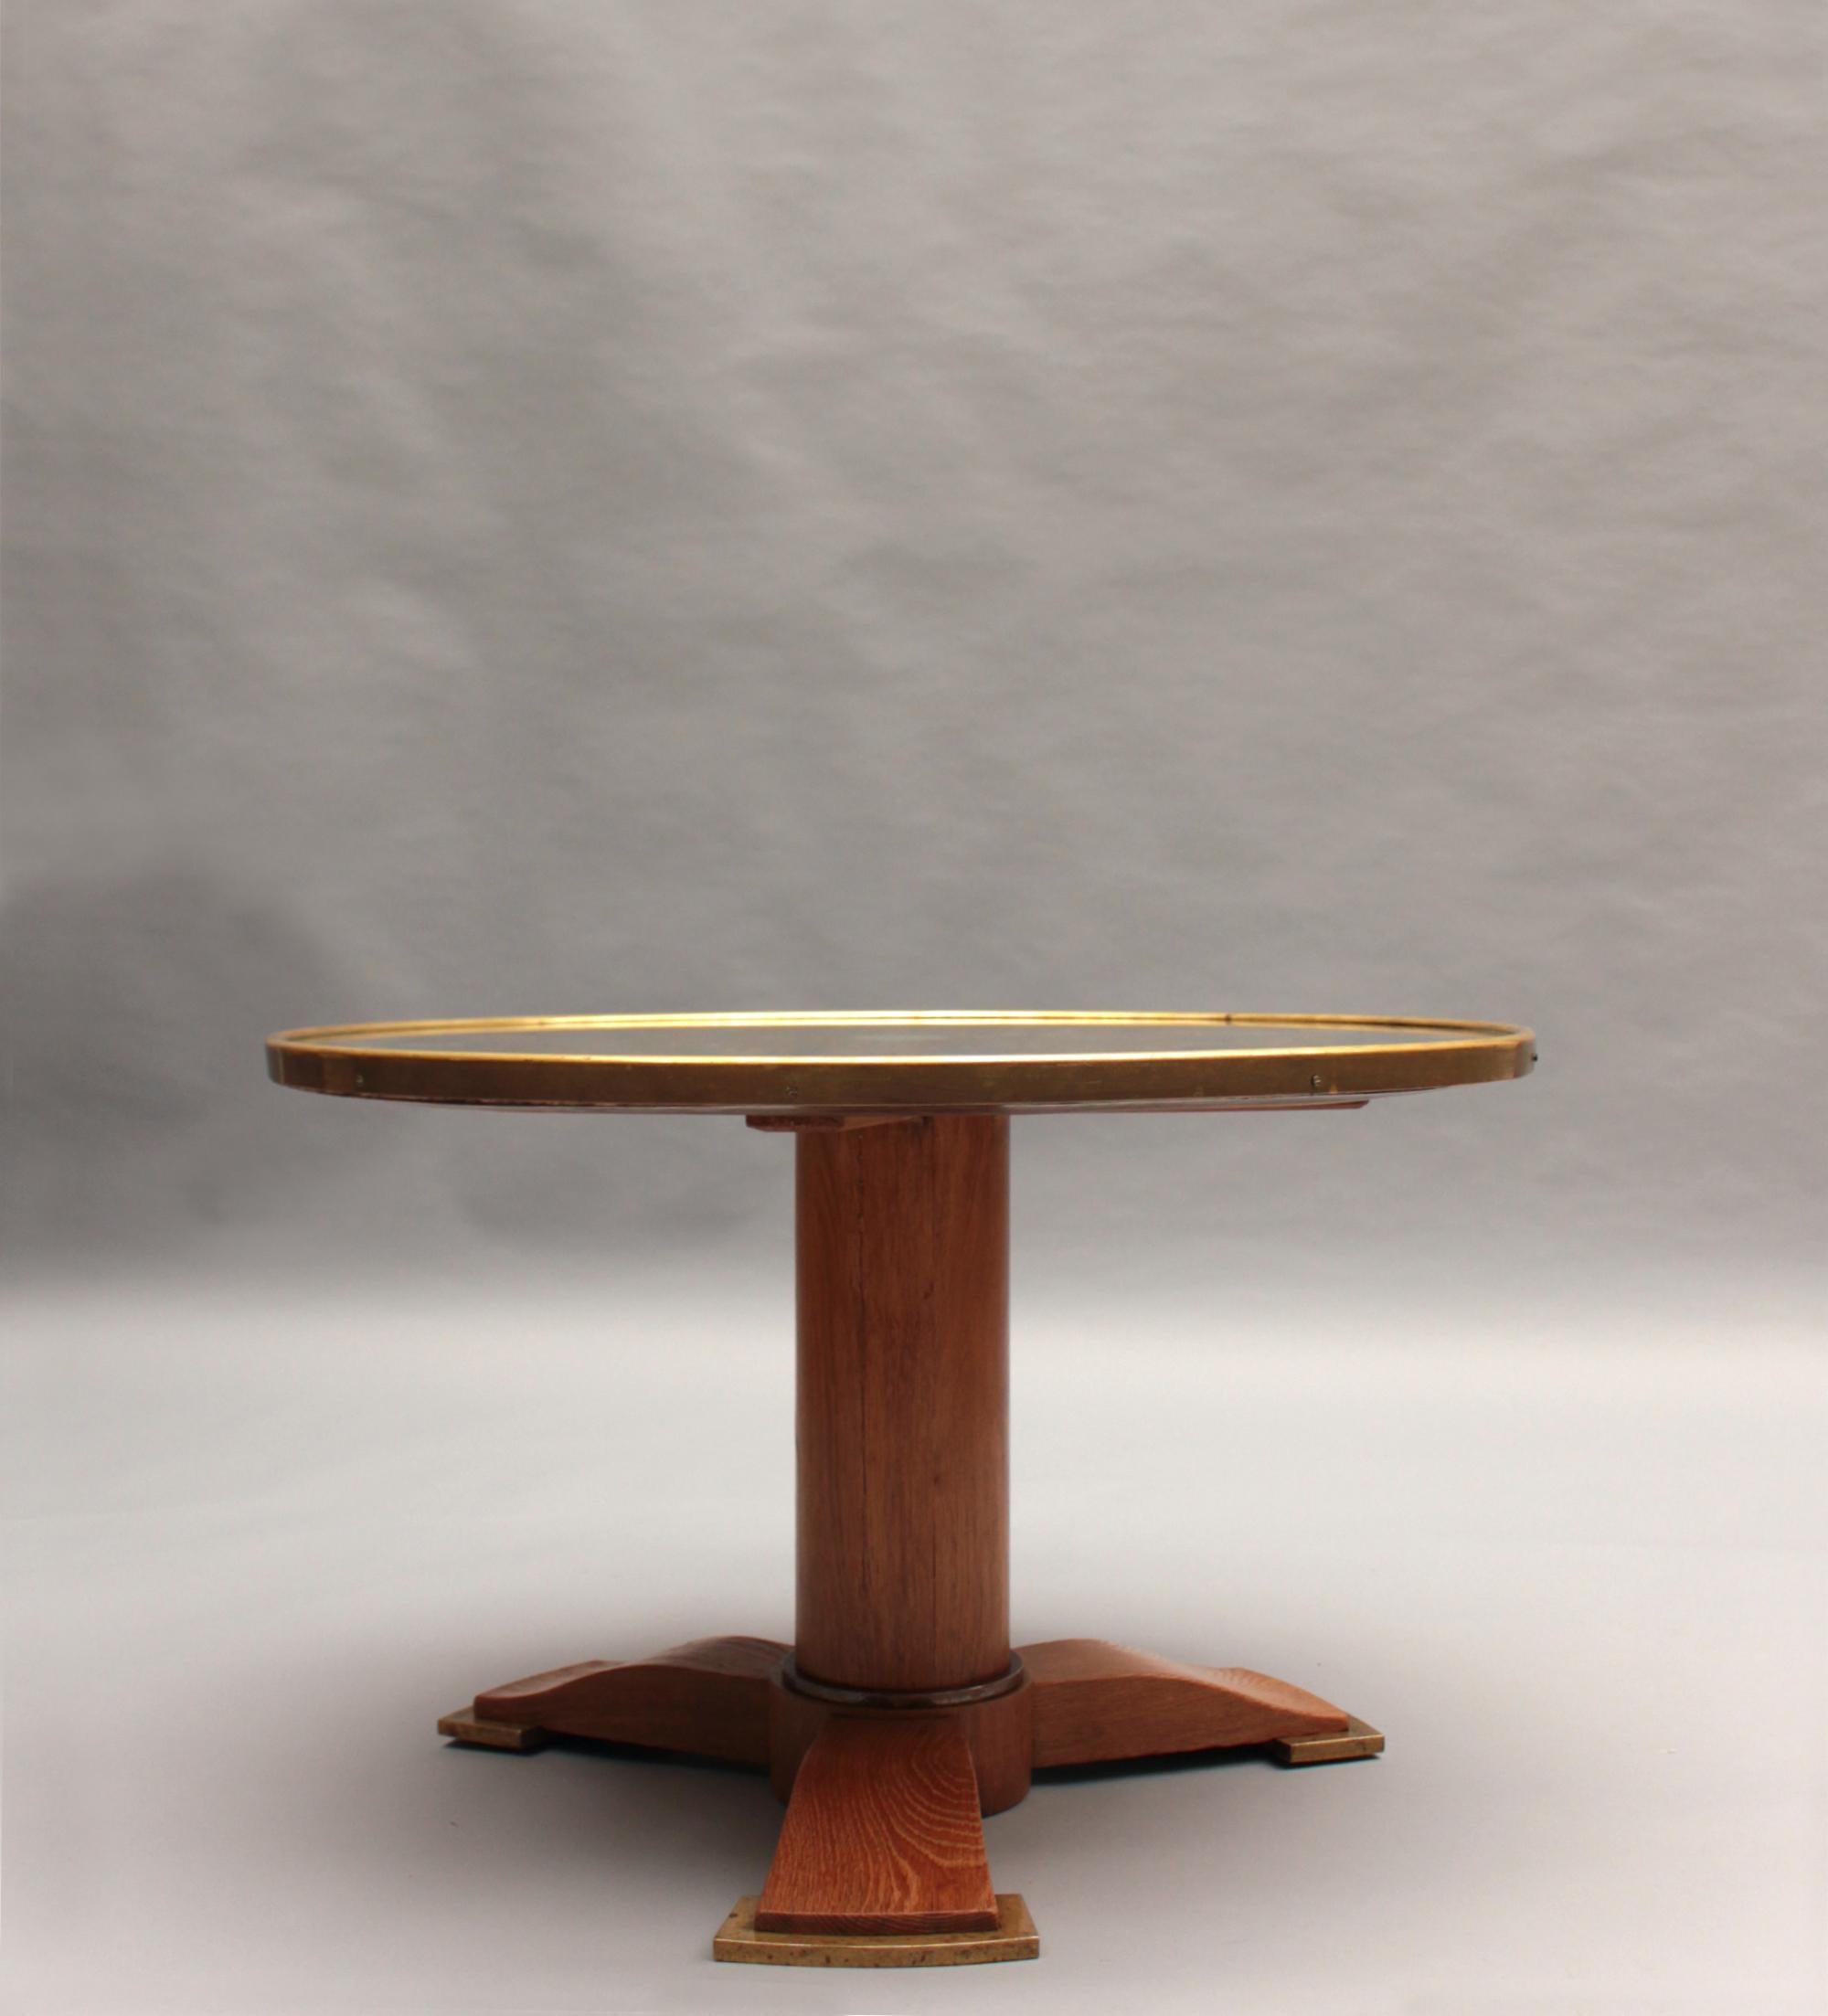 Jules Leleu (1883-1961) - A fine French Art Deco coffee table with a round eglomise mirror top framed in a bronze ring, on a cylindrical oak tripod pedestal with three slightly curved legs on bronze feet.